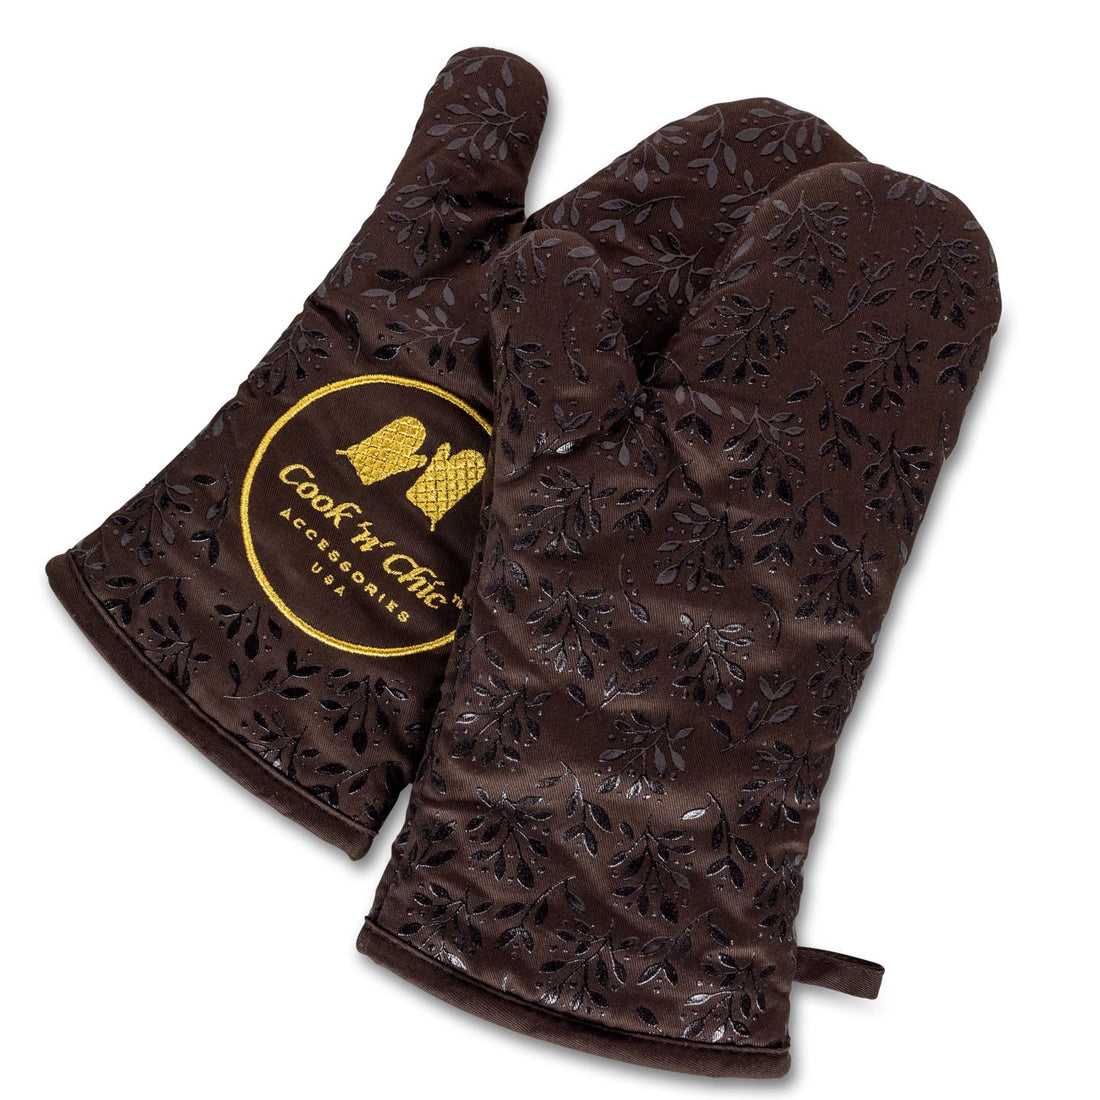 Silicon Oven Mitt: Protect Your Hands in Style